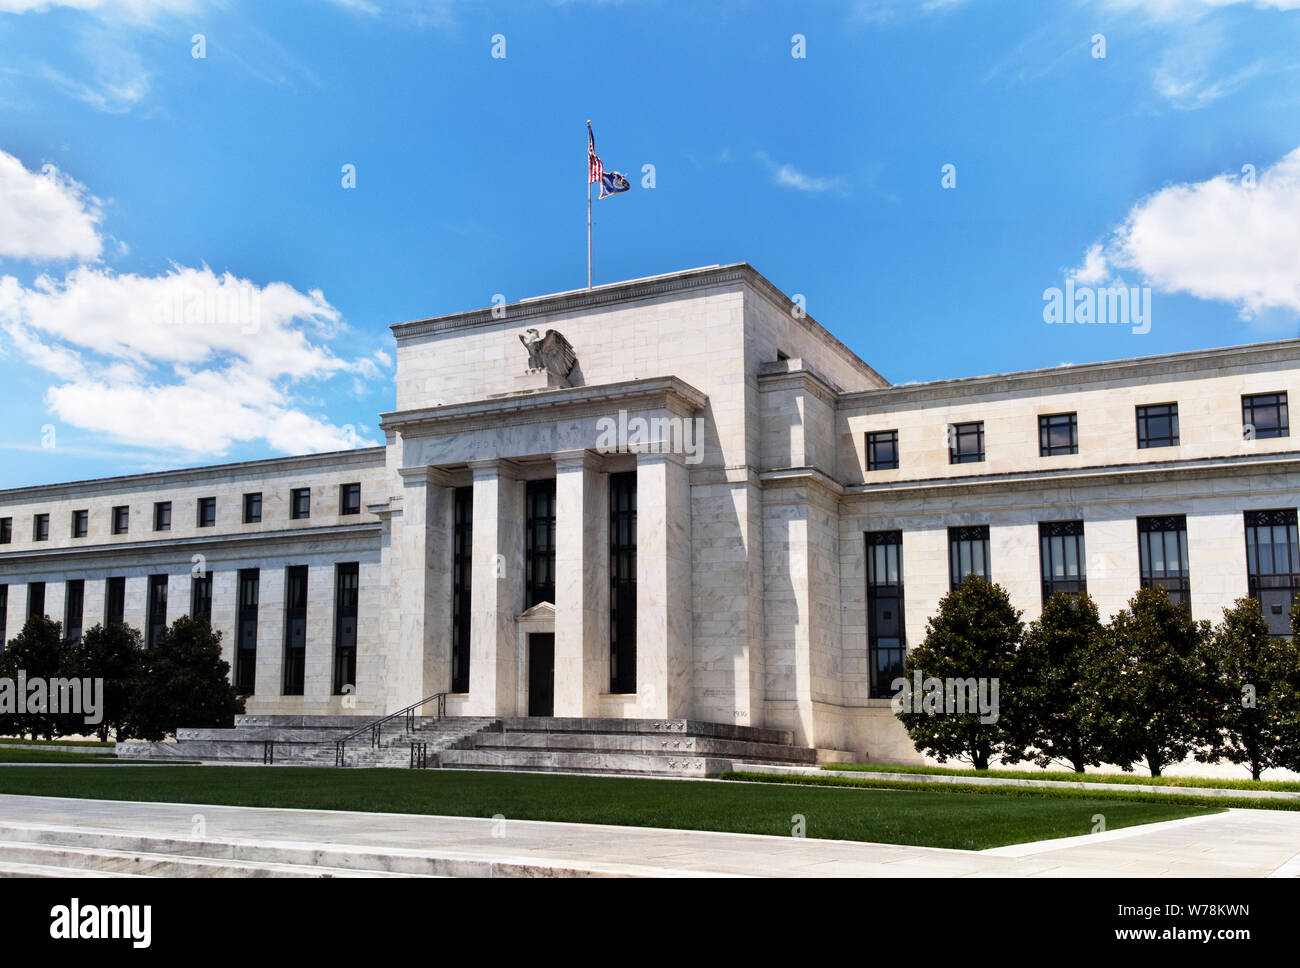 Exterior view of Federal Reserve Board of Governors Building facade entrance with eagle stone statue and American flags over a blue cloudscape sky. Stock Photo